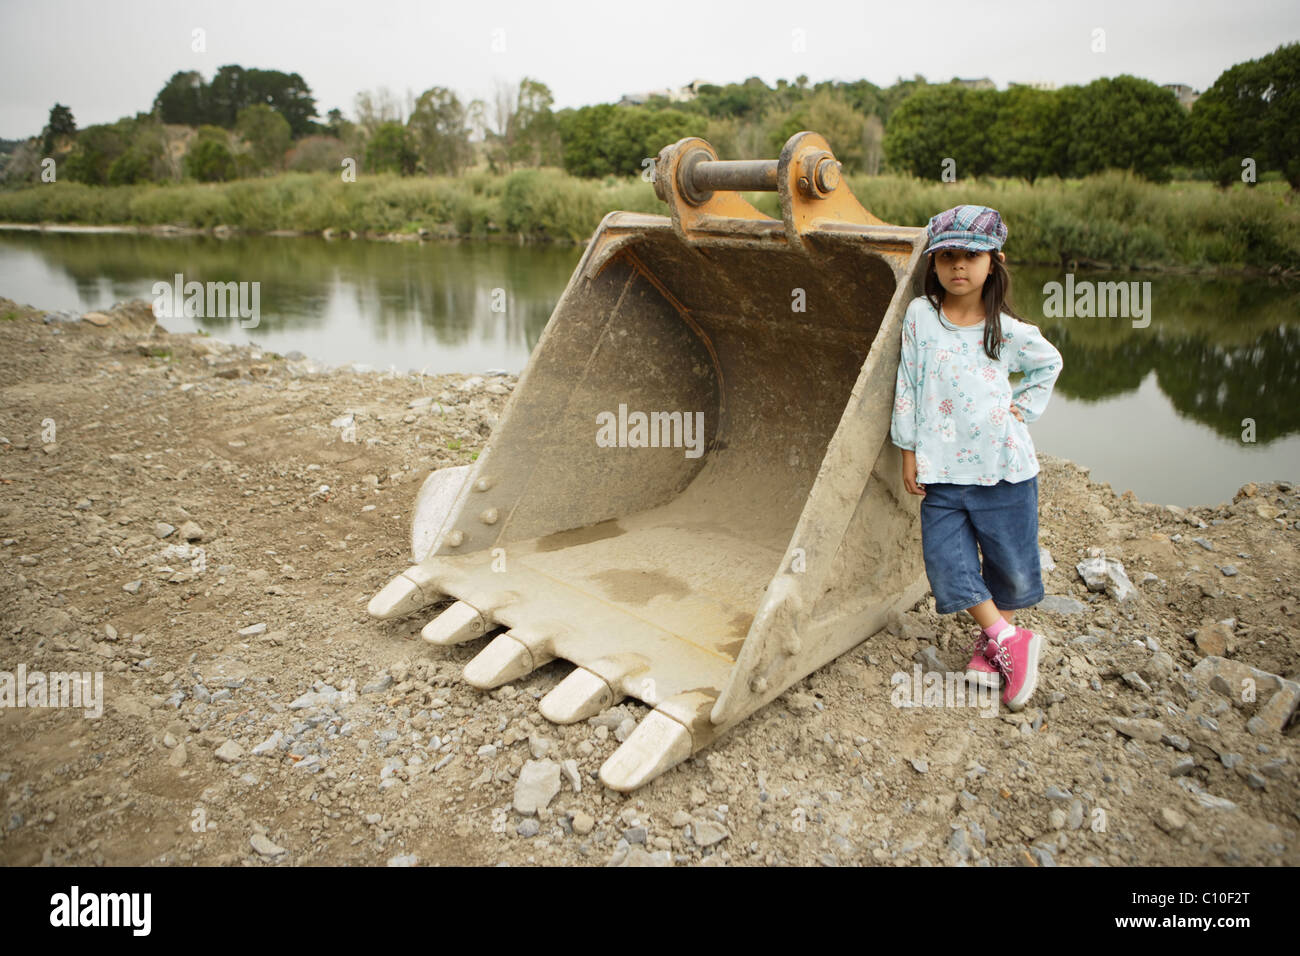 Five year old girl leans against digger shovel at the construction of flood defences, Manawatu river, Palmerston North, NZ Stock Photo